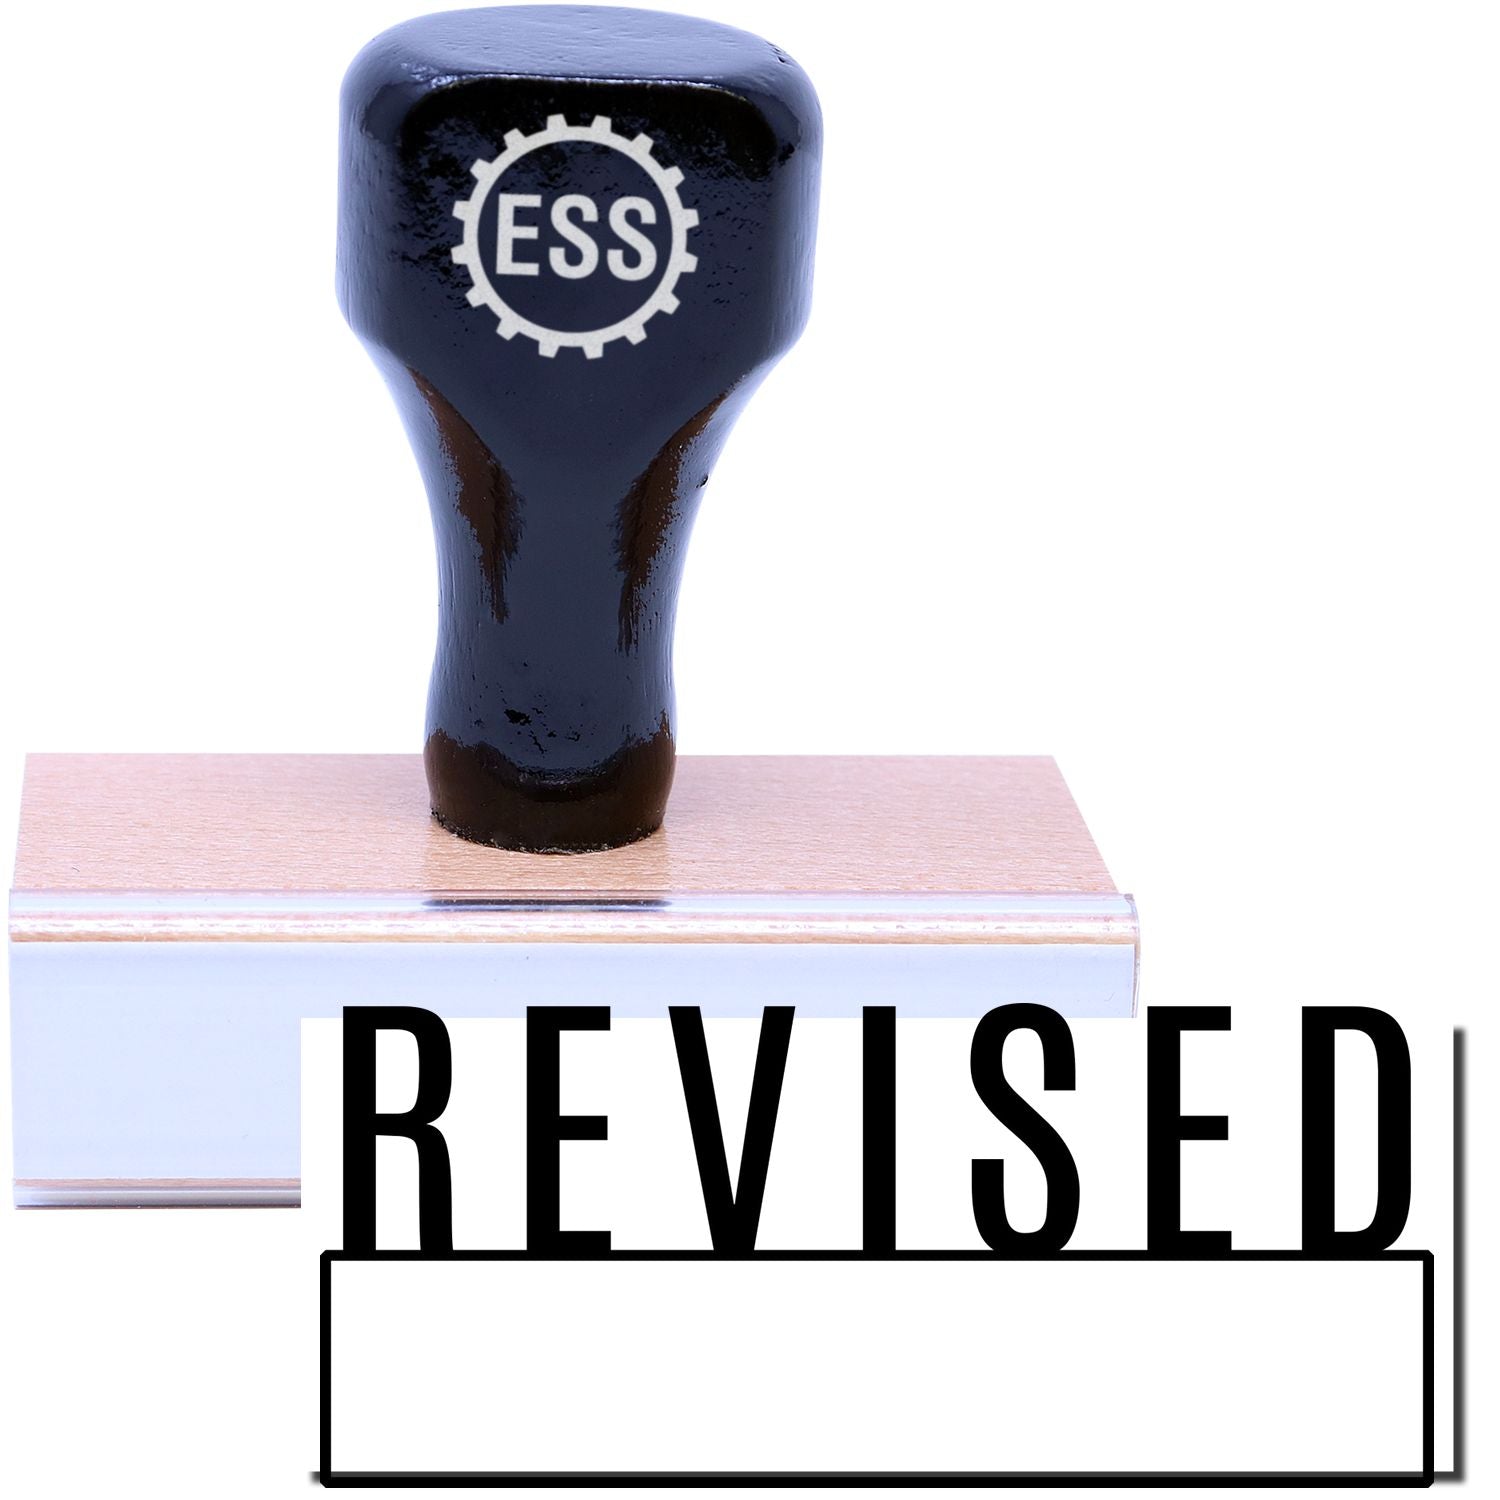 A stock office rubber stamp with a stamped image showing how the text "REVISED" in a large font with a box under the text is displayed after stamping.